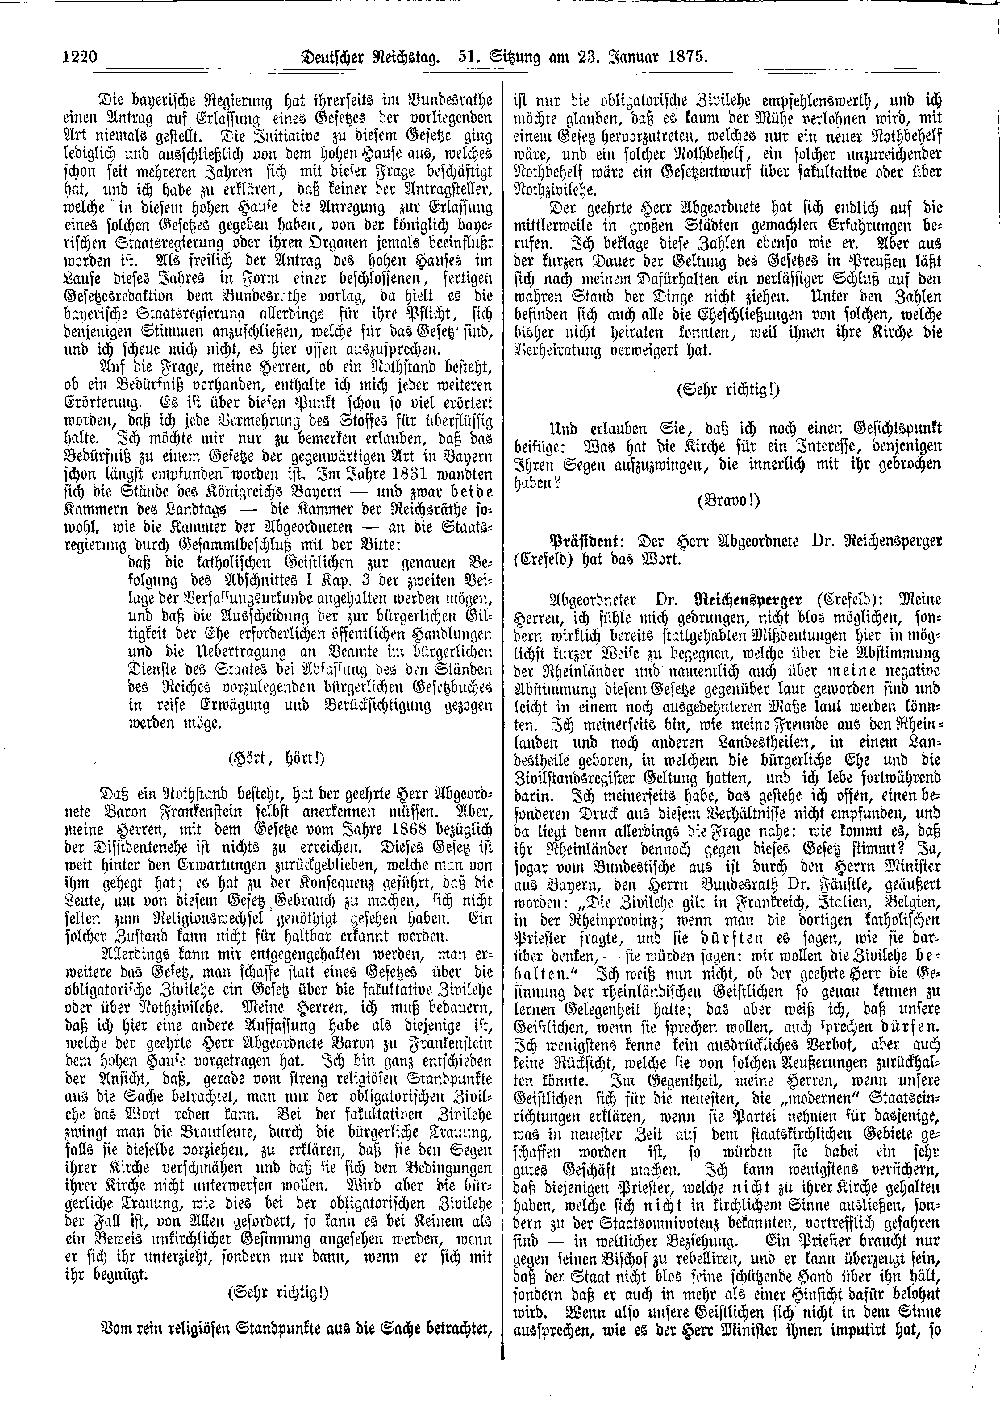 Scan of page 1220